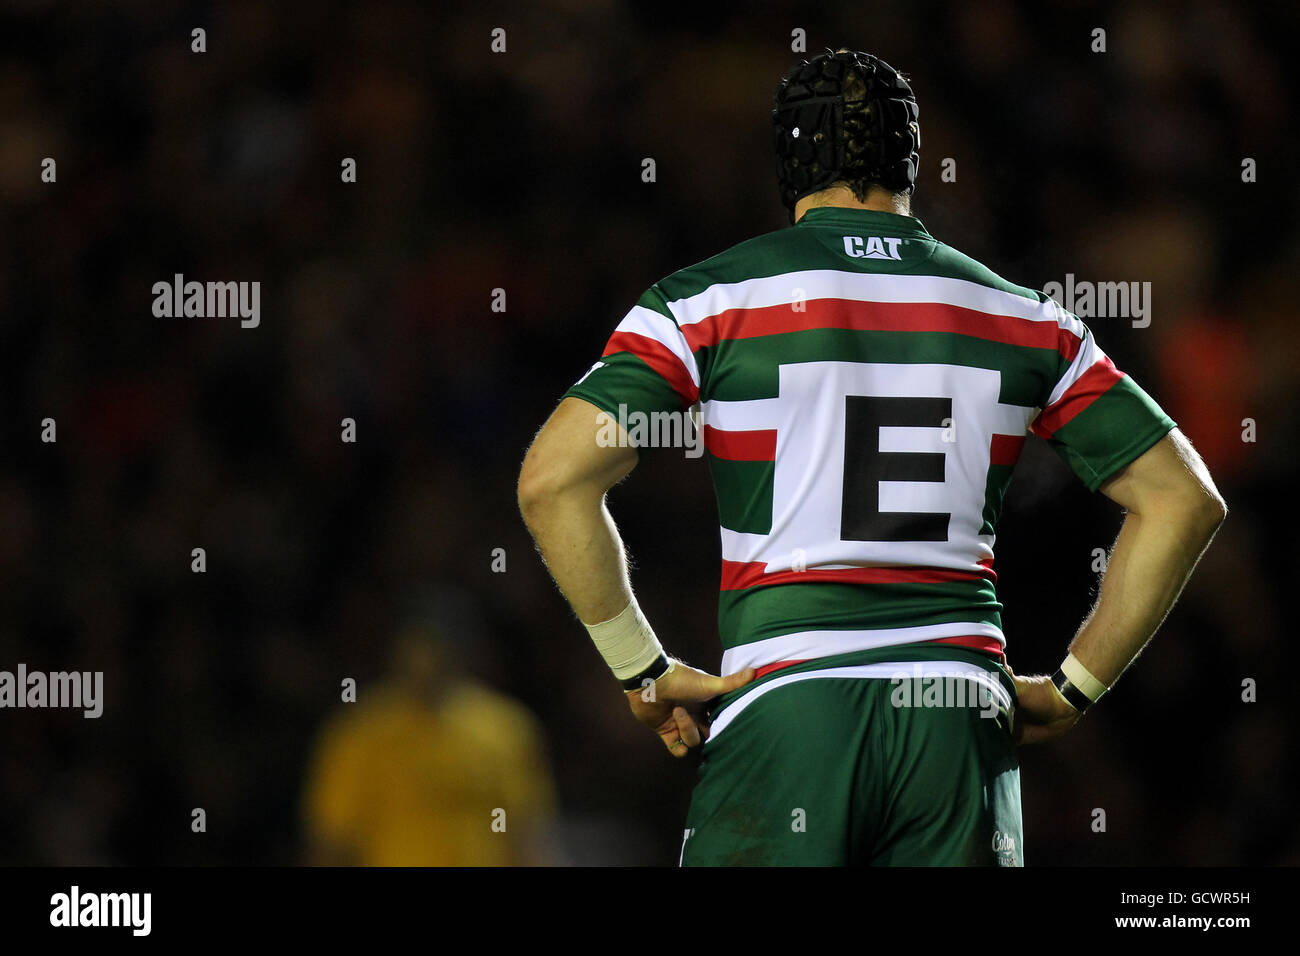 Rugby Union - Tour Match - Leicester Tigers v Australia - Welford Road. Leicester Tiger's George Skivington wears the letter E on the back of his shirt Stock Photo